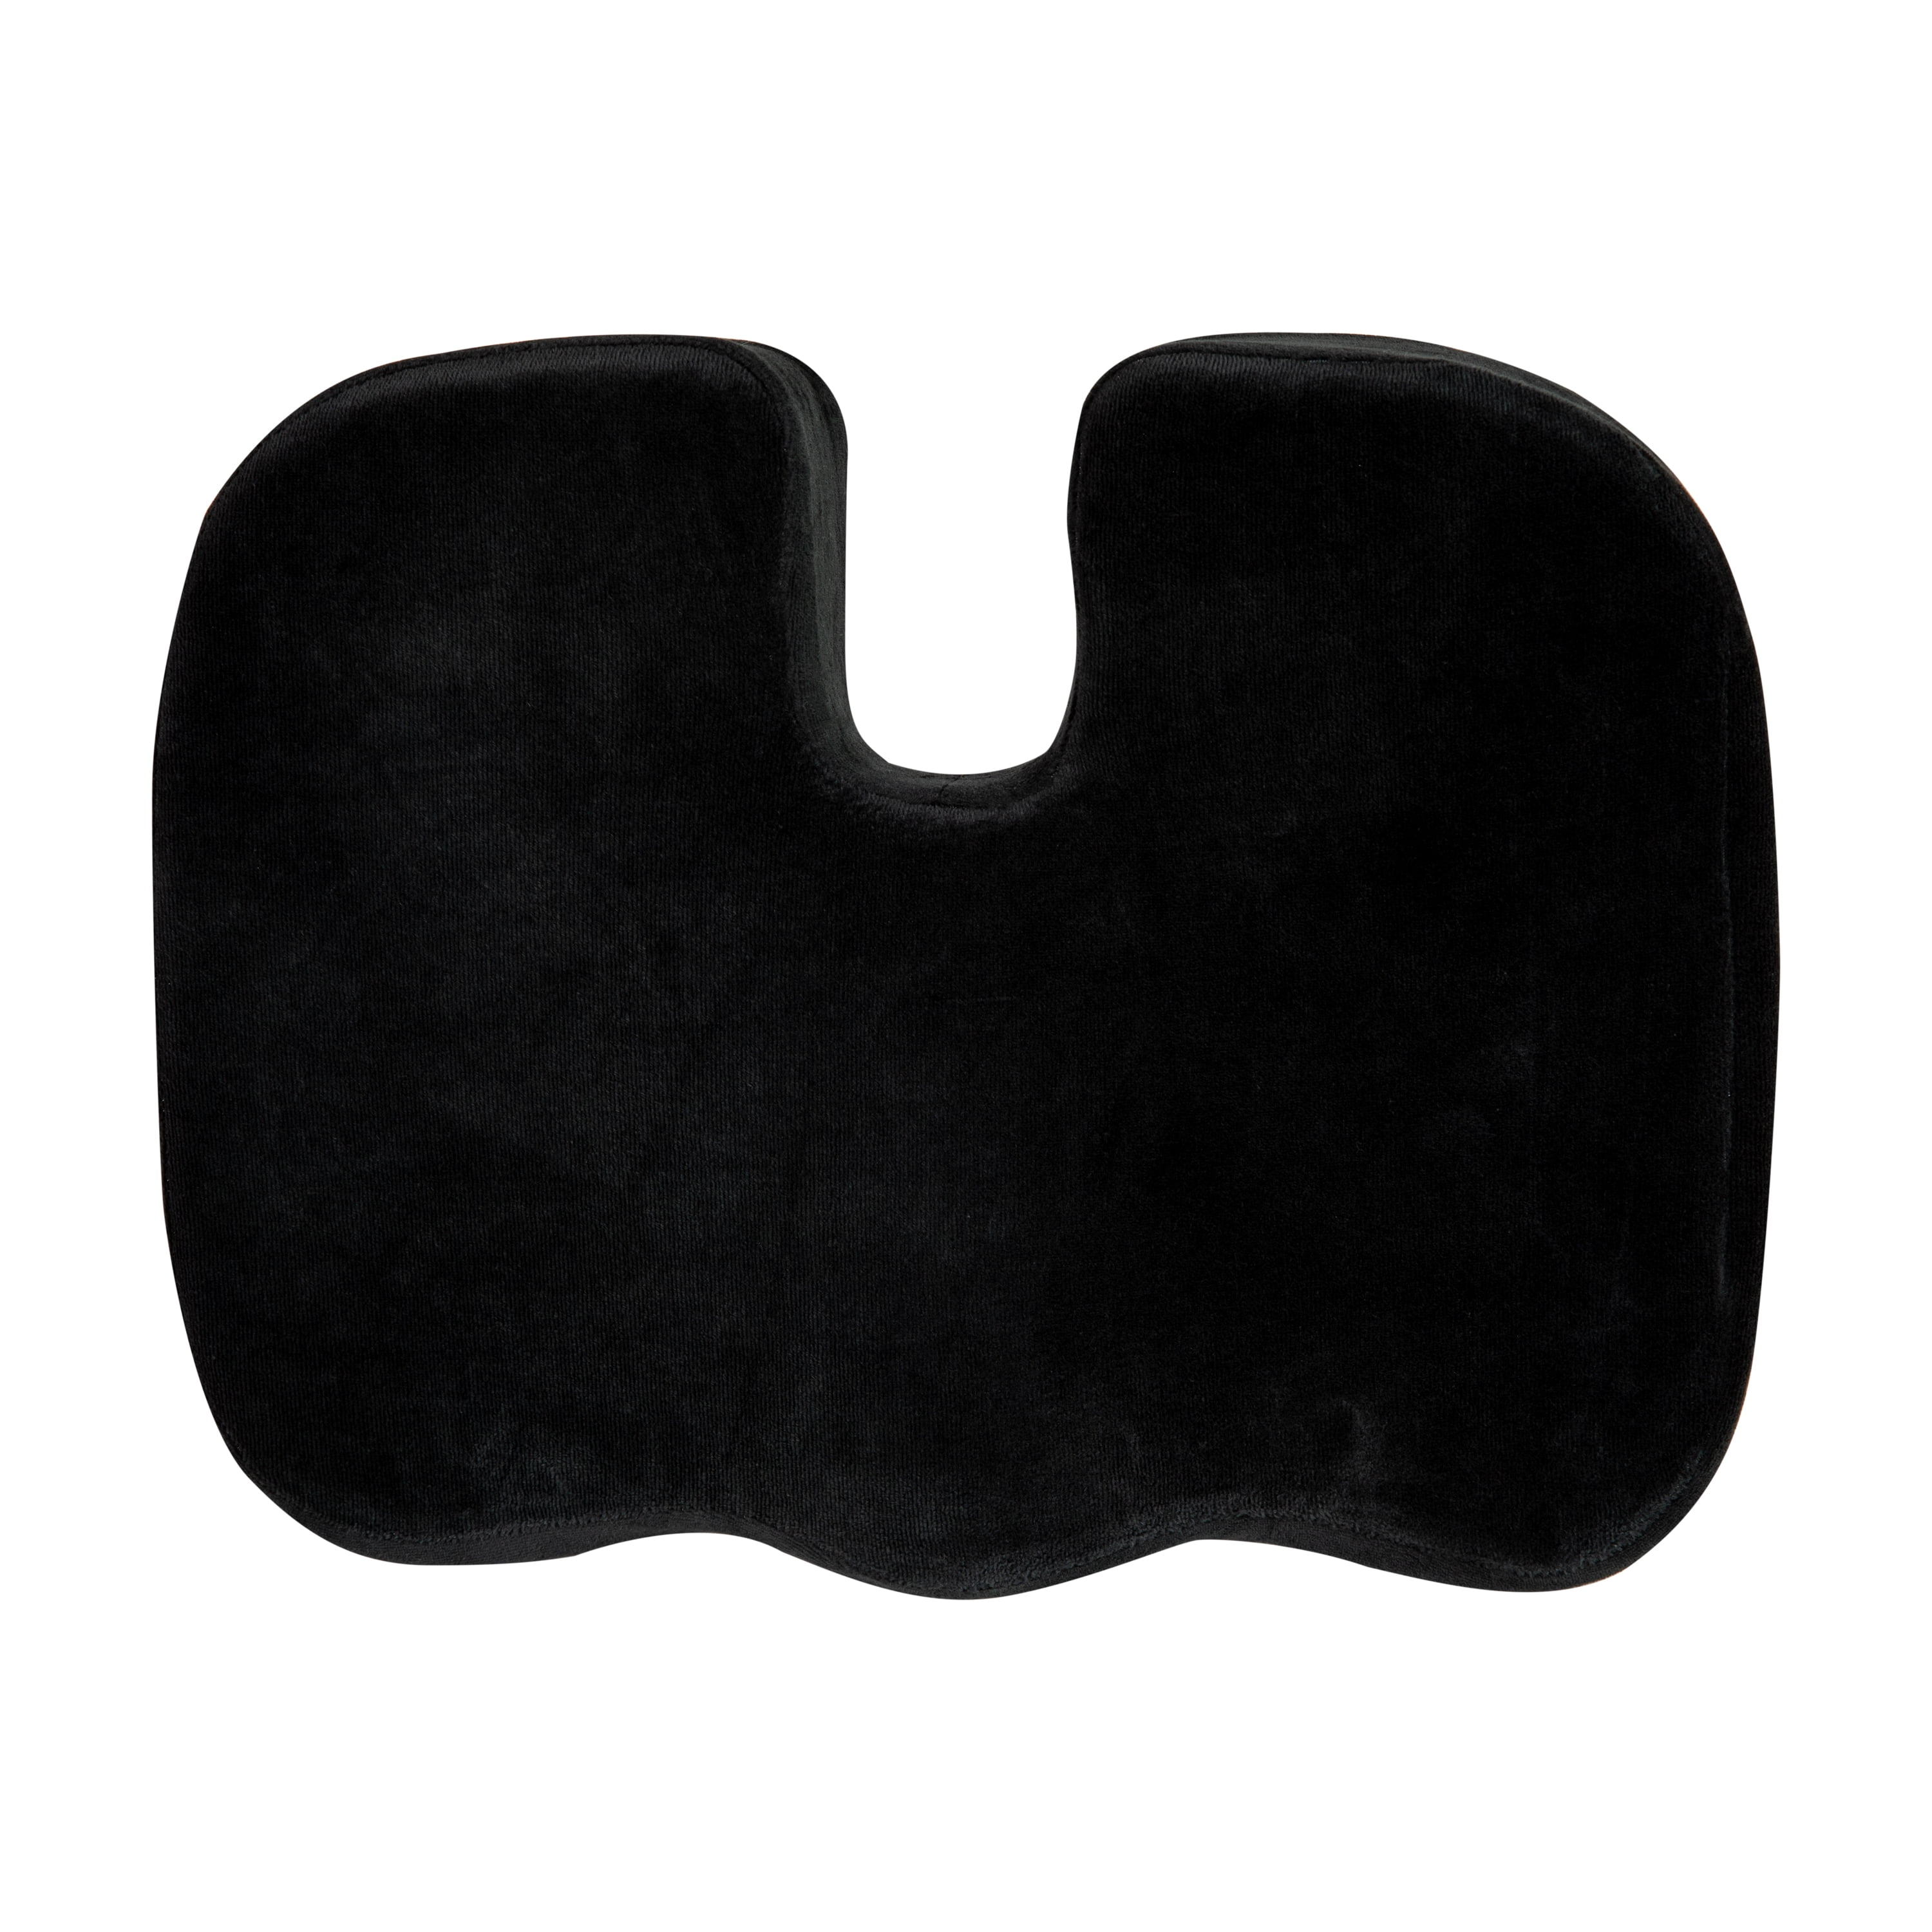 FORARI® Patented Seat Cushion for Desk Chair - Firm & Thick, Best